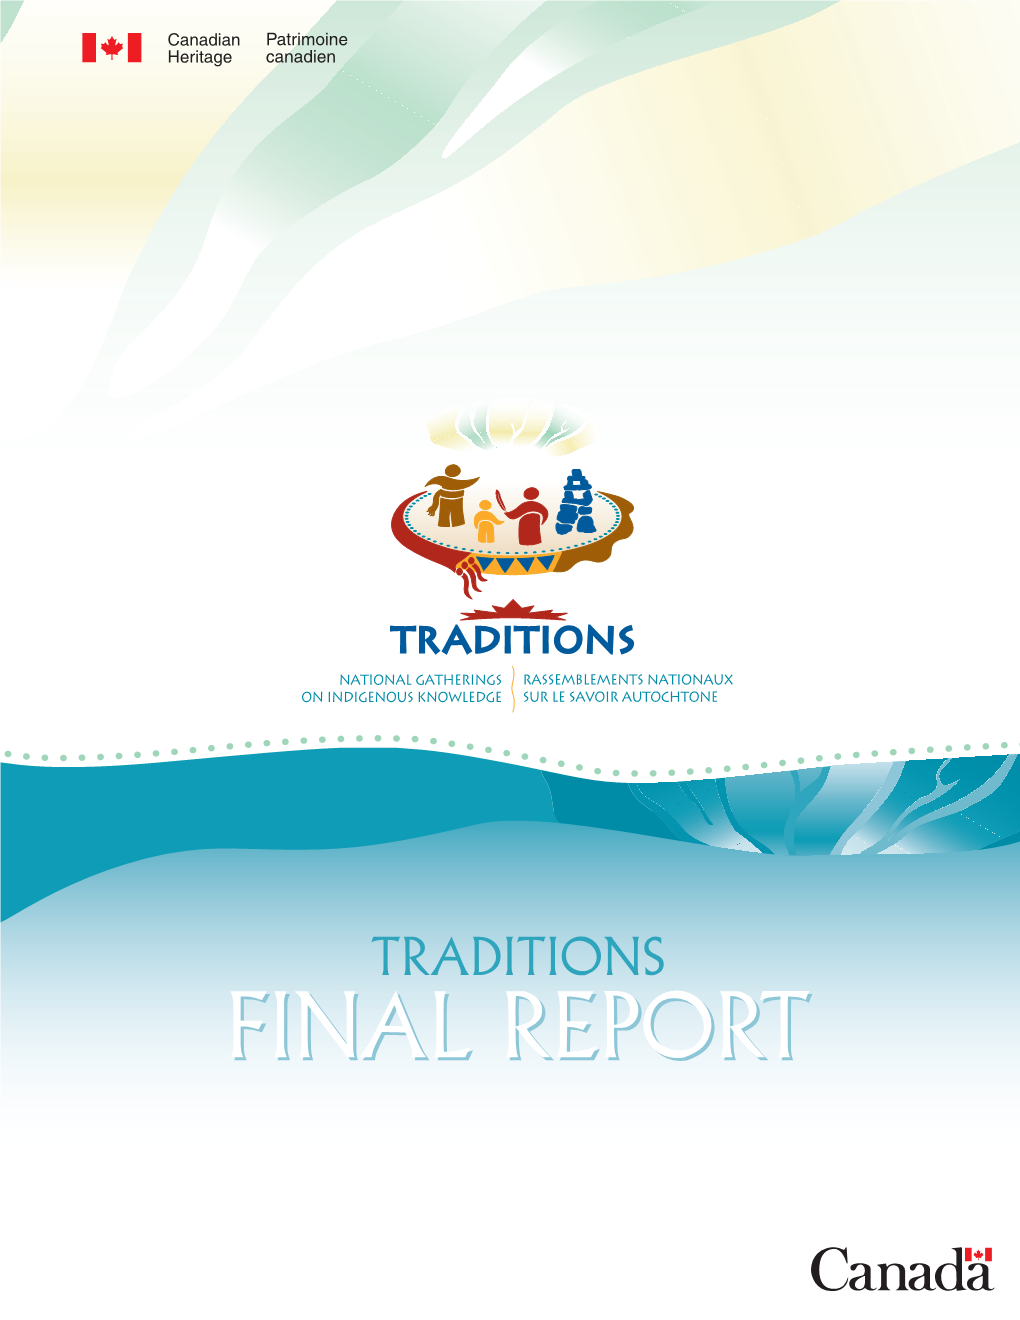 Traditions: National Gatherings on Indigenous Knowledge - Final Report